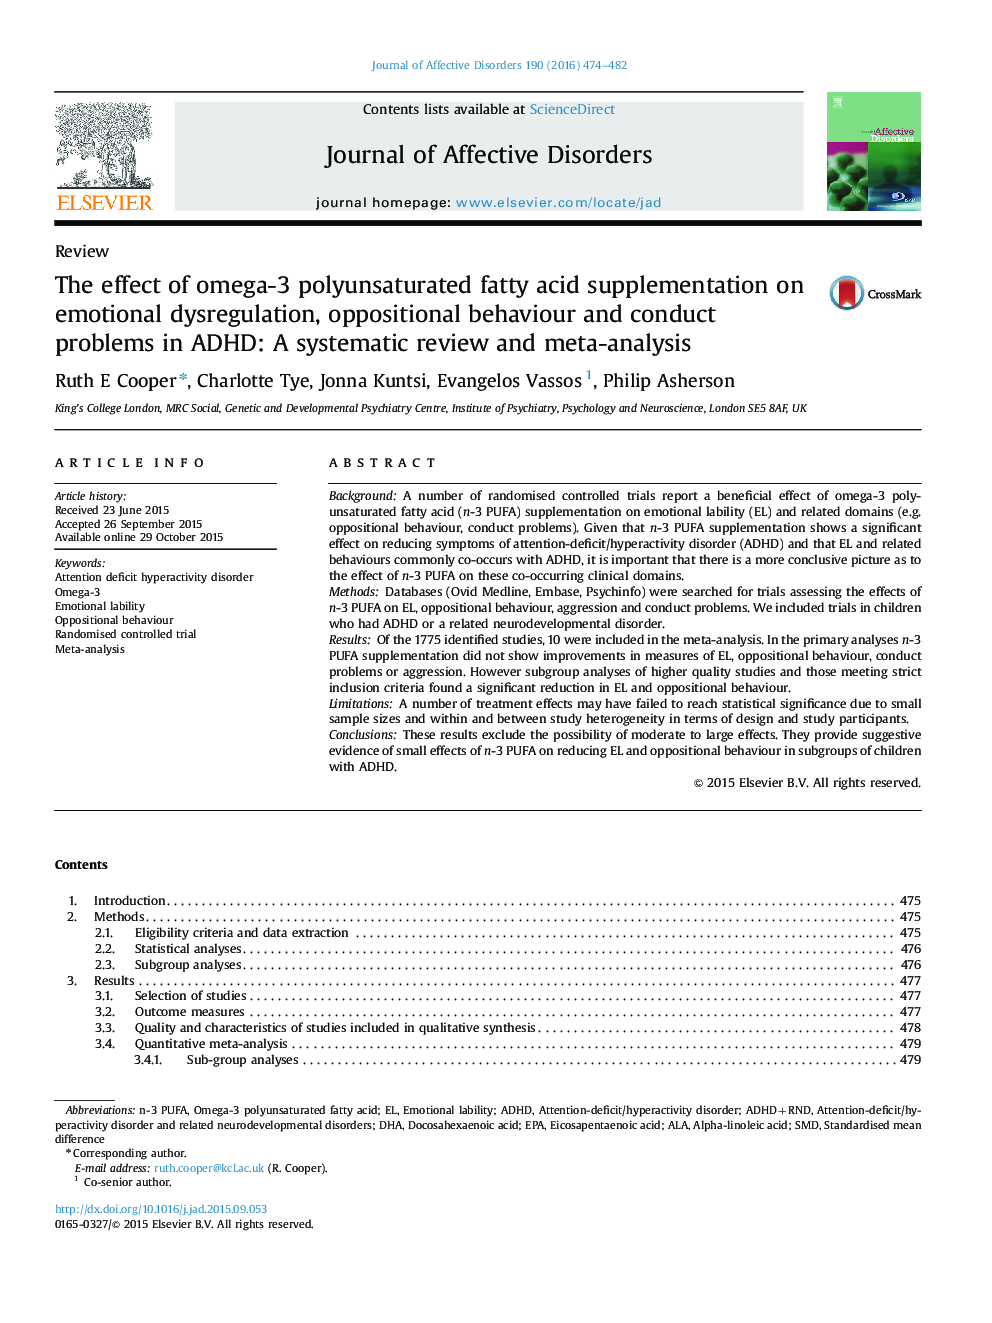 The effect of omega-3 polyunsaturated fatty acid supplementation on emotional dysregulation, oppositional behaviour and conduct problems in ADHD: A systematic review and meta-analysis